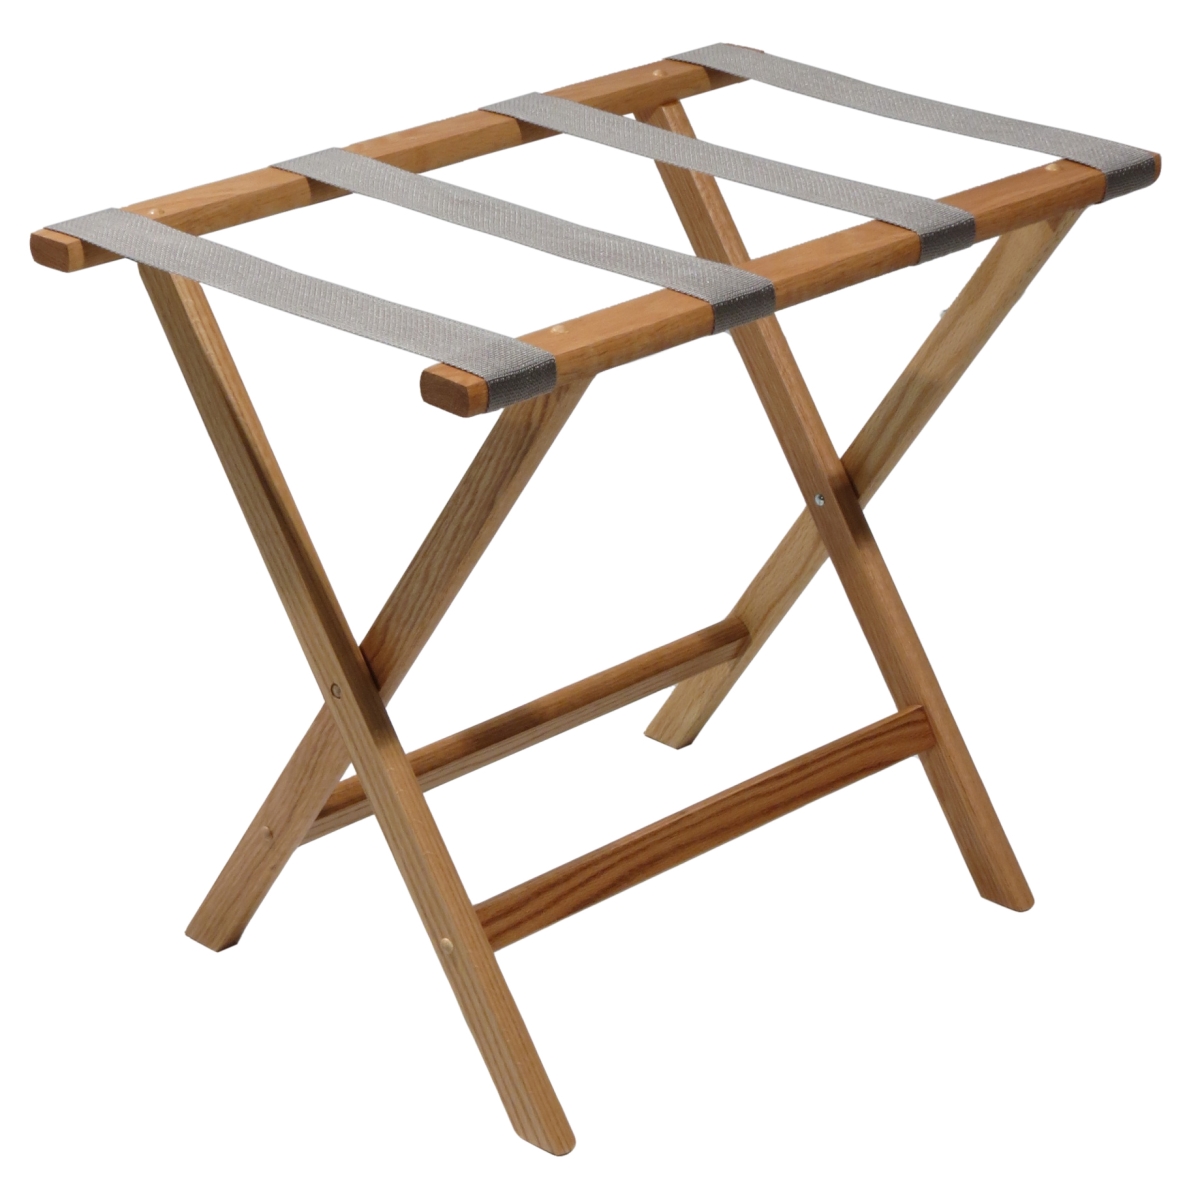 Wooden Mallet LR-LOGRY Deluxe Straight Leg Luggage Rack with Gray Straps - Light Oak